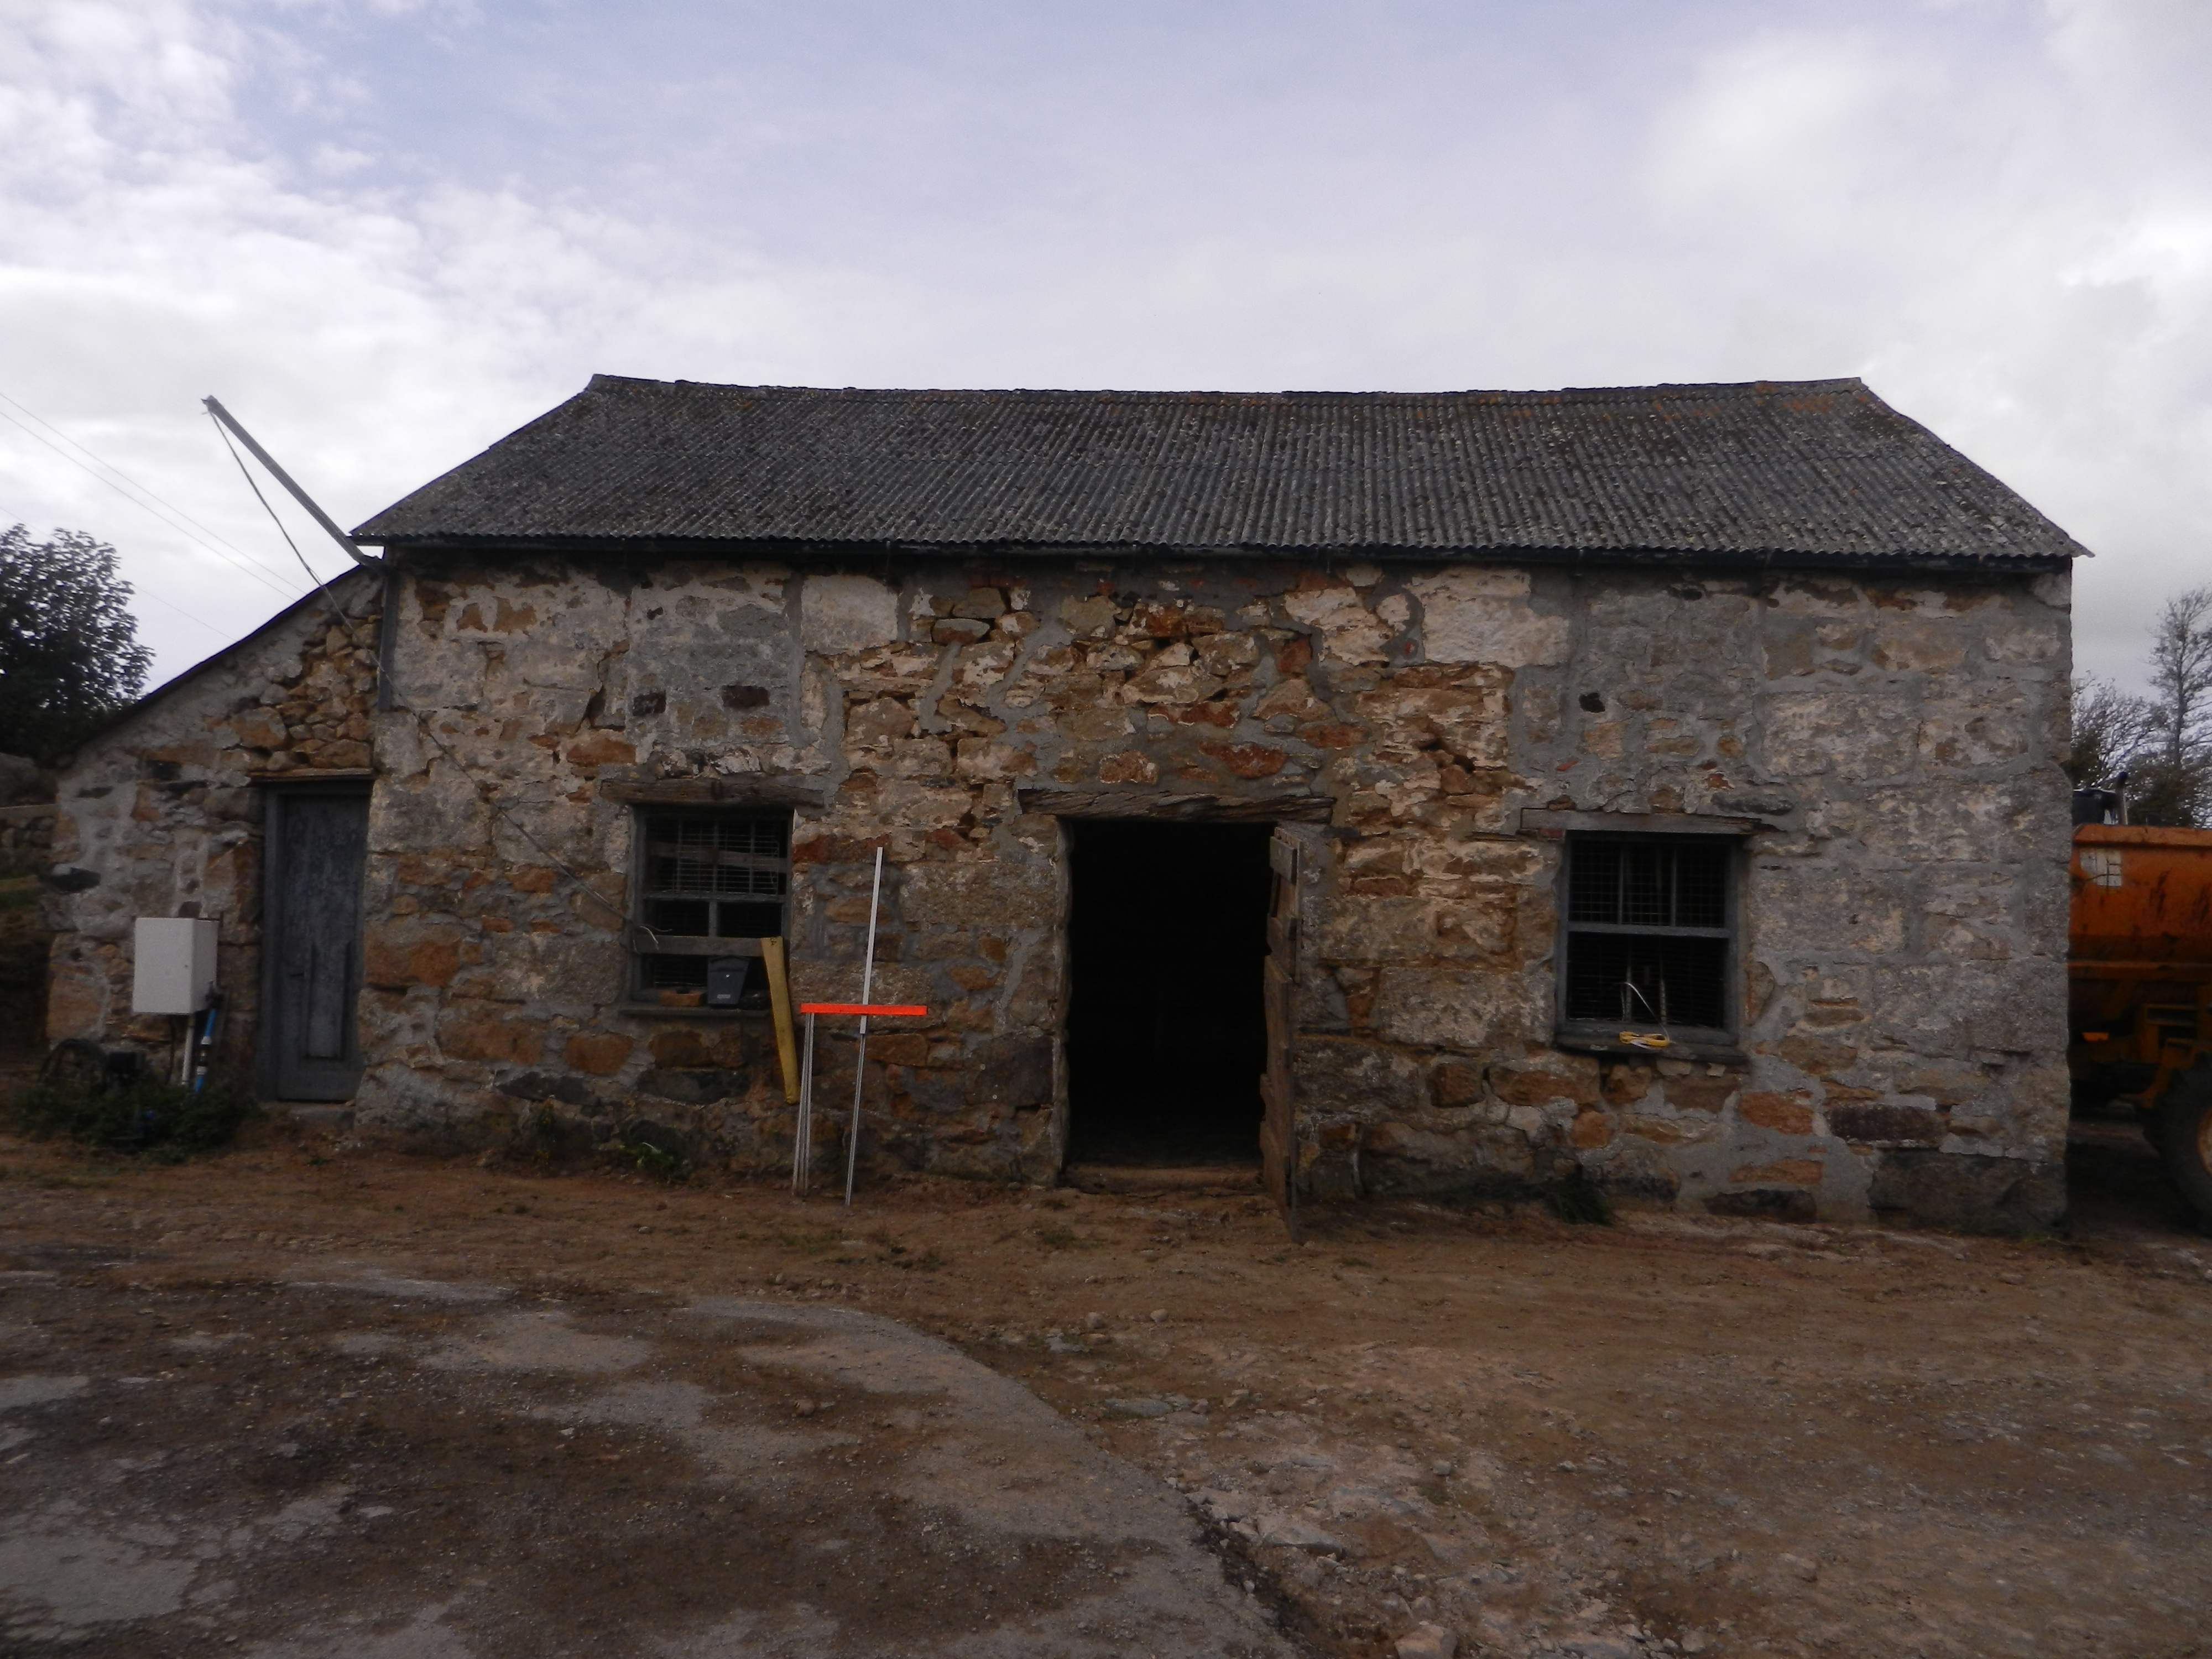 Barn prior to being converted into a 3 bedroom house.